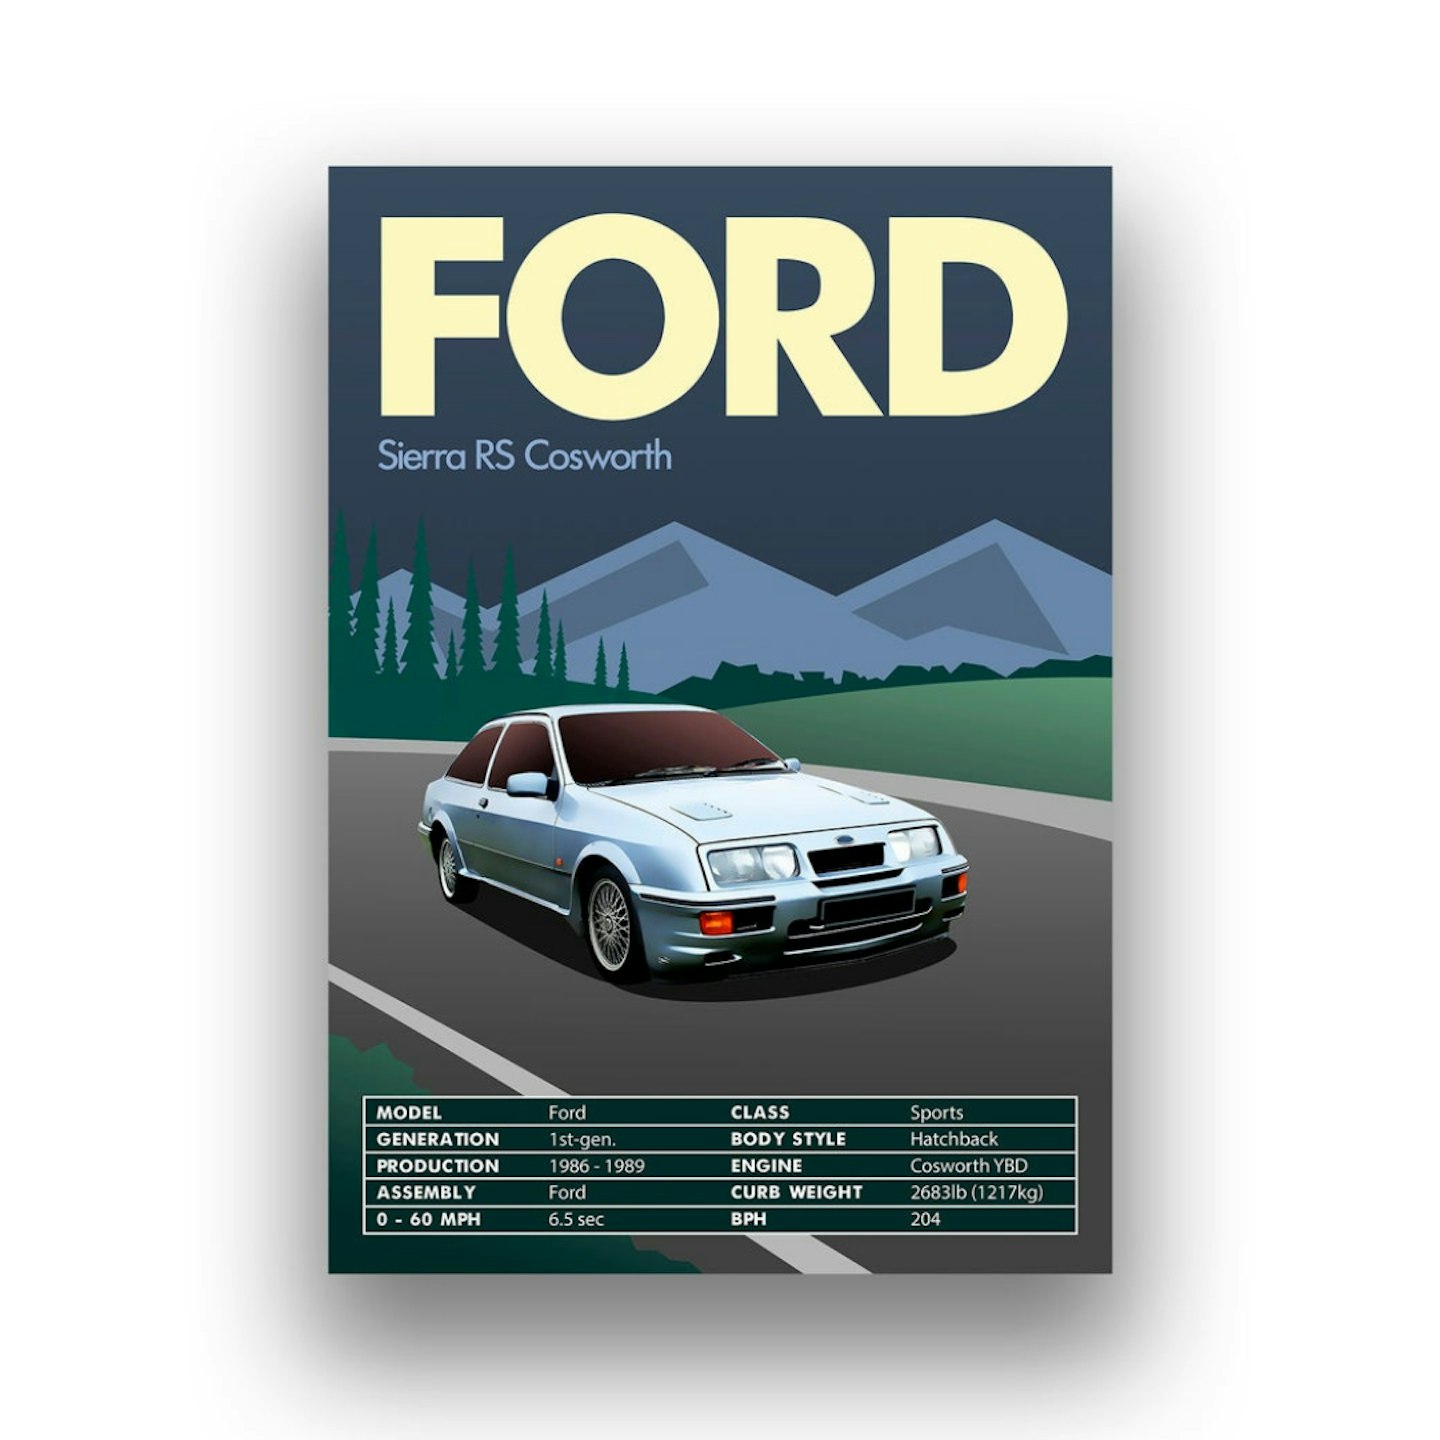 Retro Vintage Classic Car Poster Ford Sierra RS Cosworth